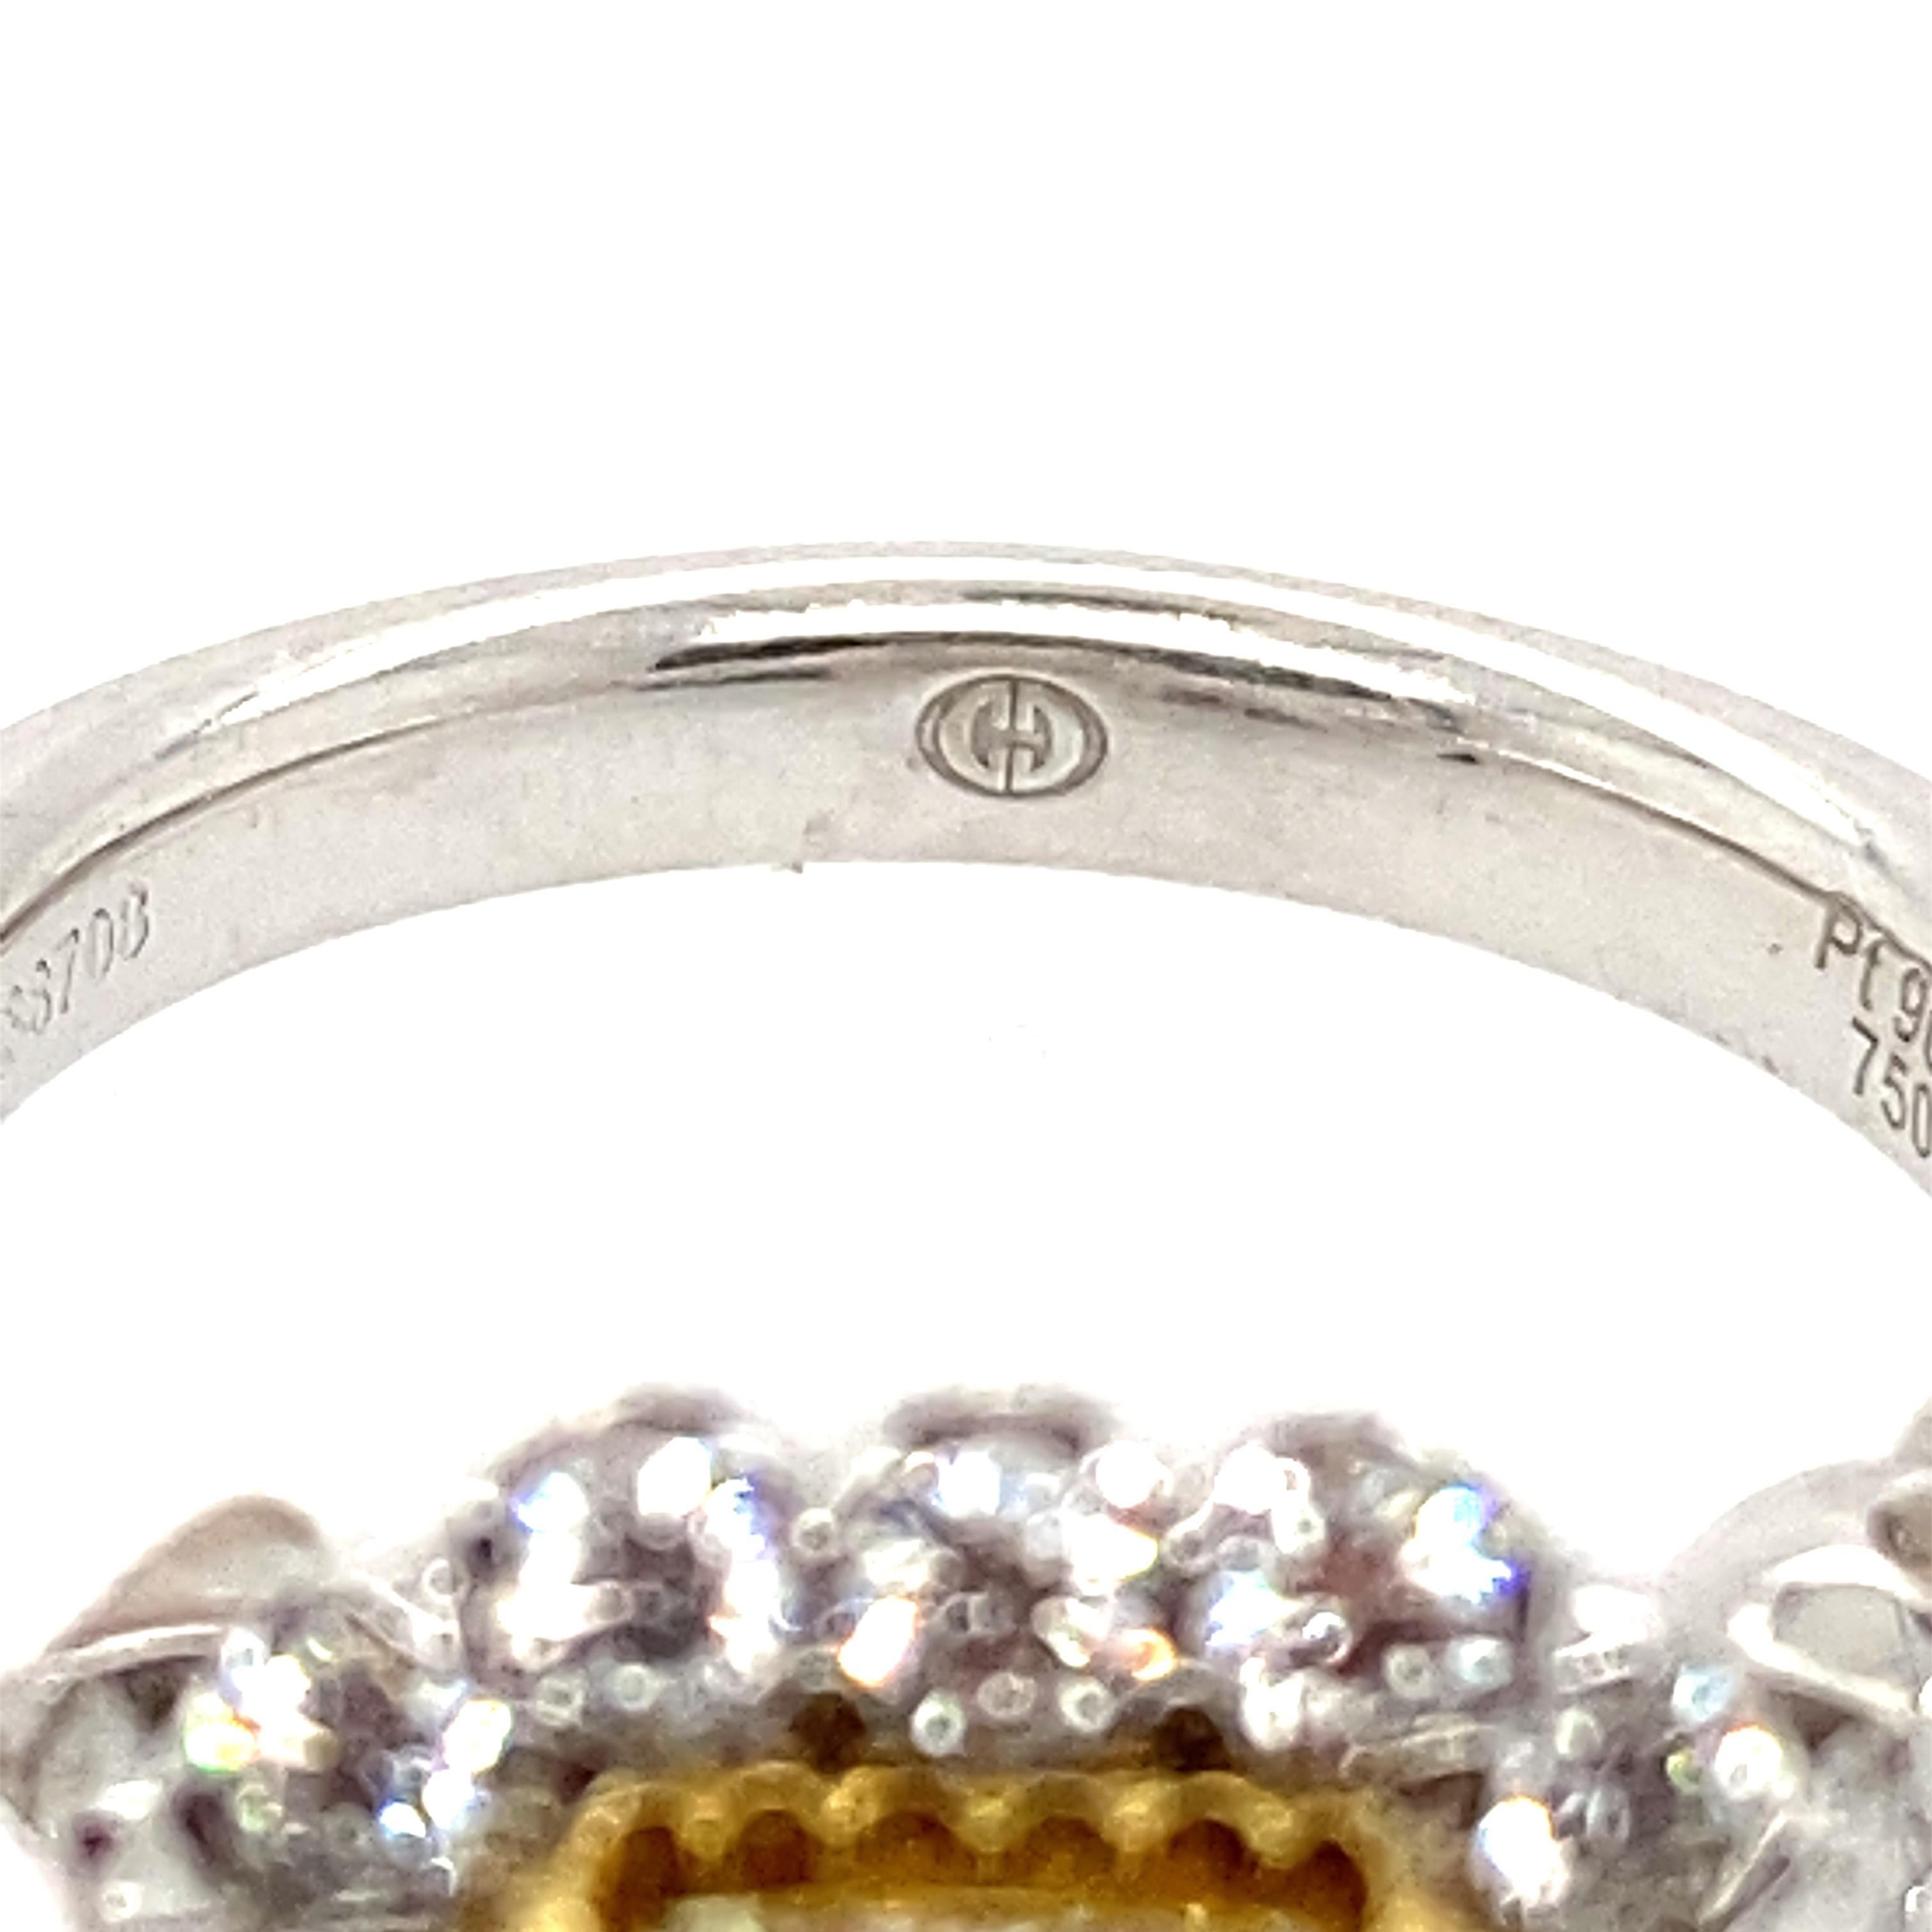 1.54 Carat Fancy Light Yellow, VVS1  Clarity. The center looks more vibrant as it is framed in 18 karat Yellow gold diamonds. The brighter the Yellow the more expensive the diamond. 
Dazzling ring can be worn as a right hand ring or is a stunning